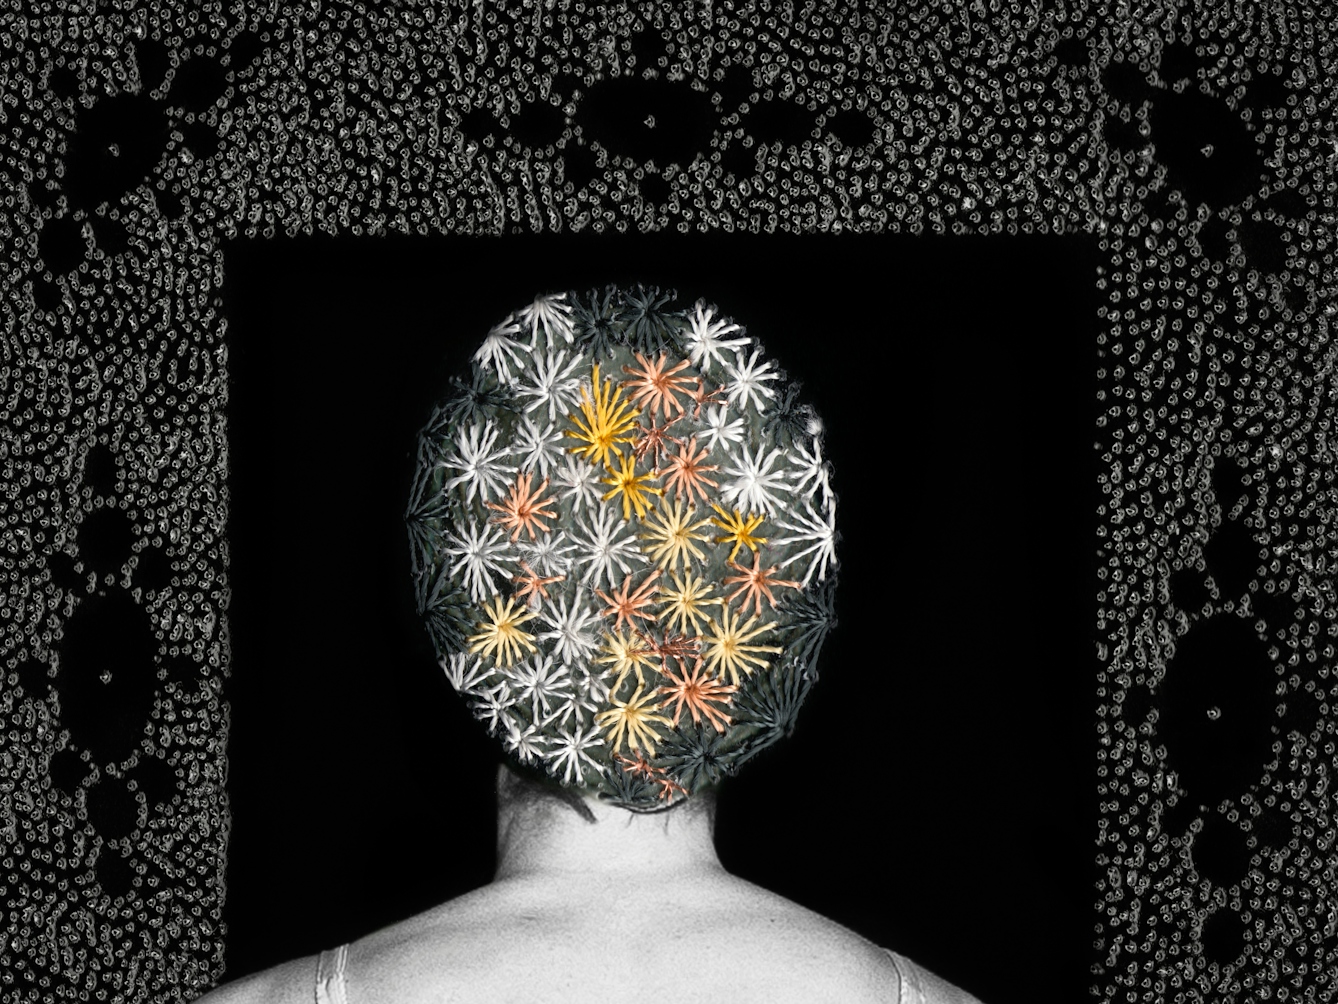 Artwork made up of a black and white photograph of the head of a female figure from behind, against a black background. Embroidered into the photographic print with yellow, orange and white coloured thread is a crisscross floral pattern which exactly covers her head and hair. In front of the figure is a large rectangular frame made up of a layered texture of grey dots which forms a doorway.